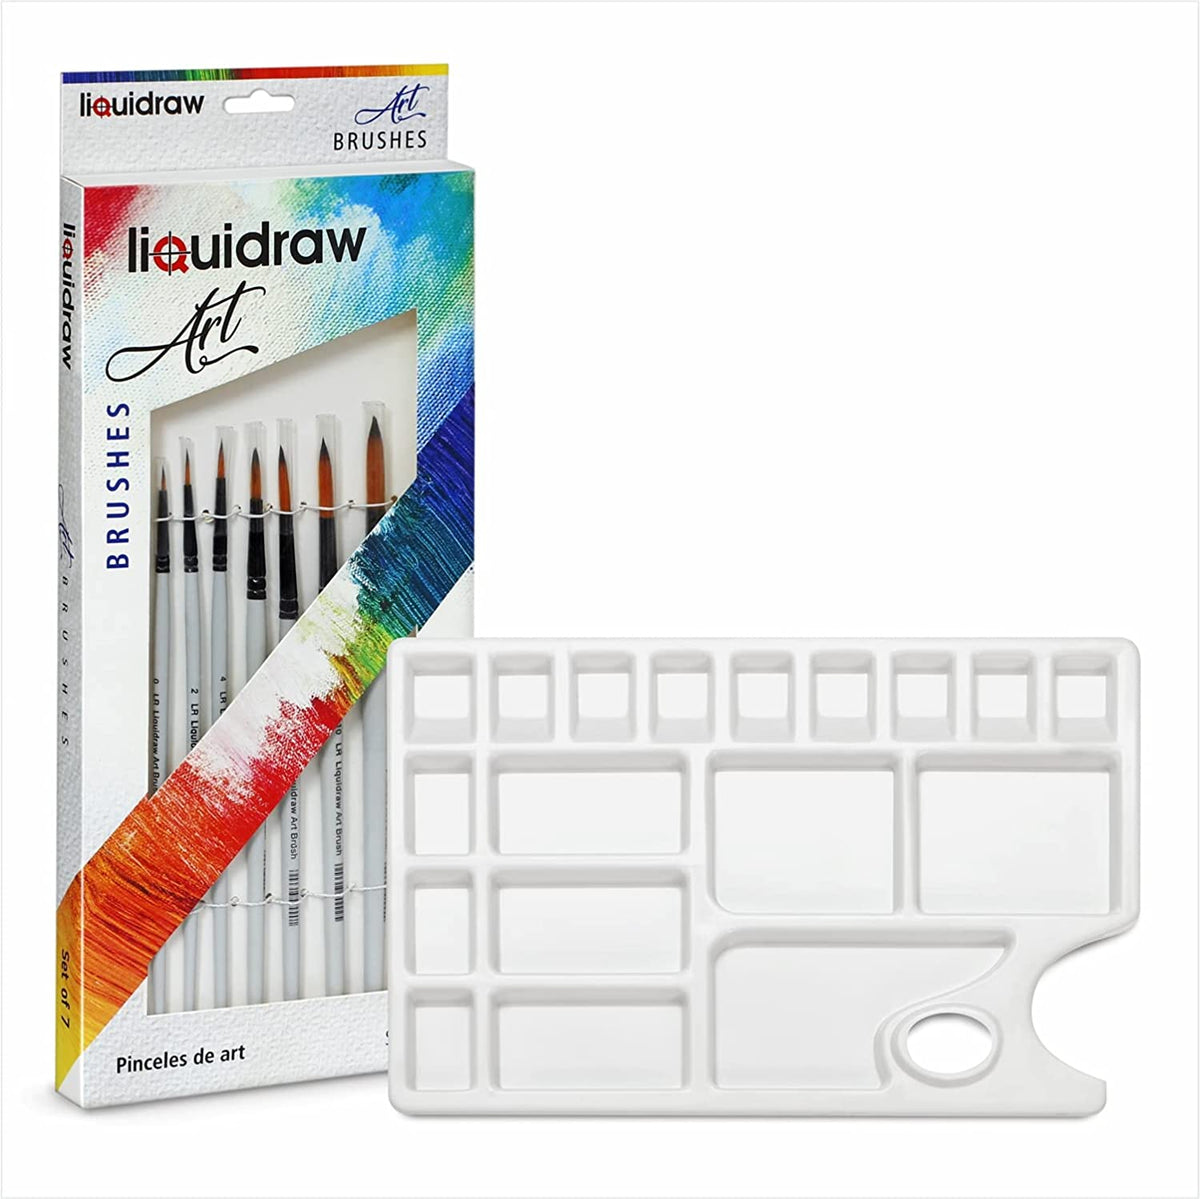 Liquidraw 33 Well Paint Palette for Acrylic Painting Watercolour